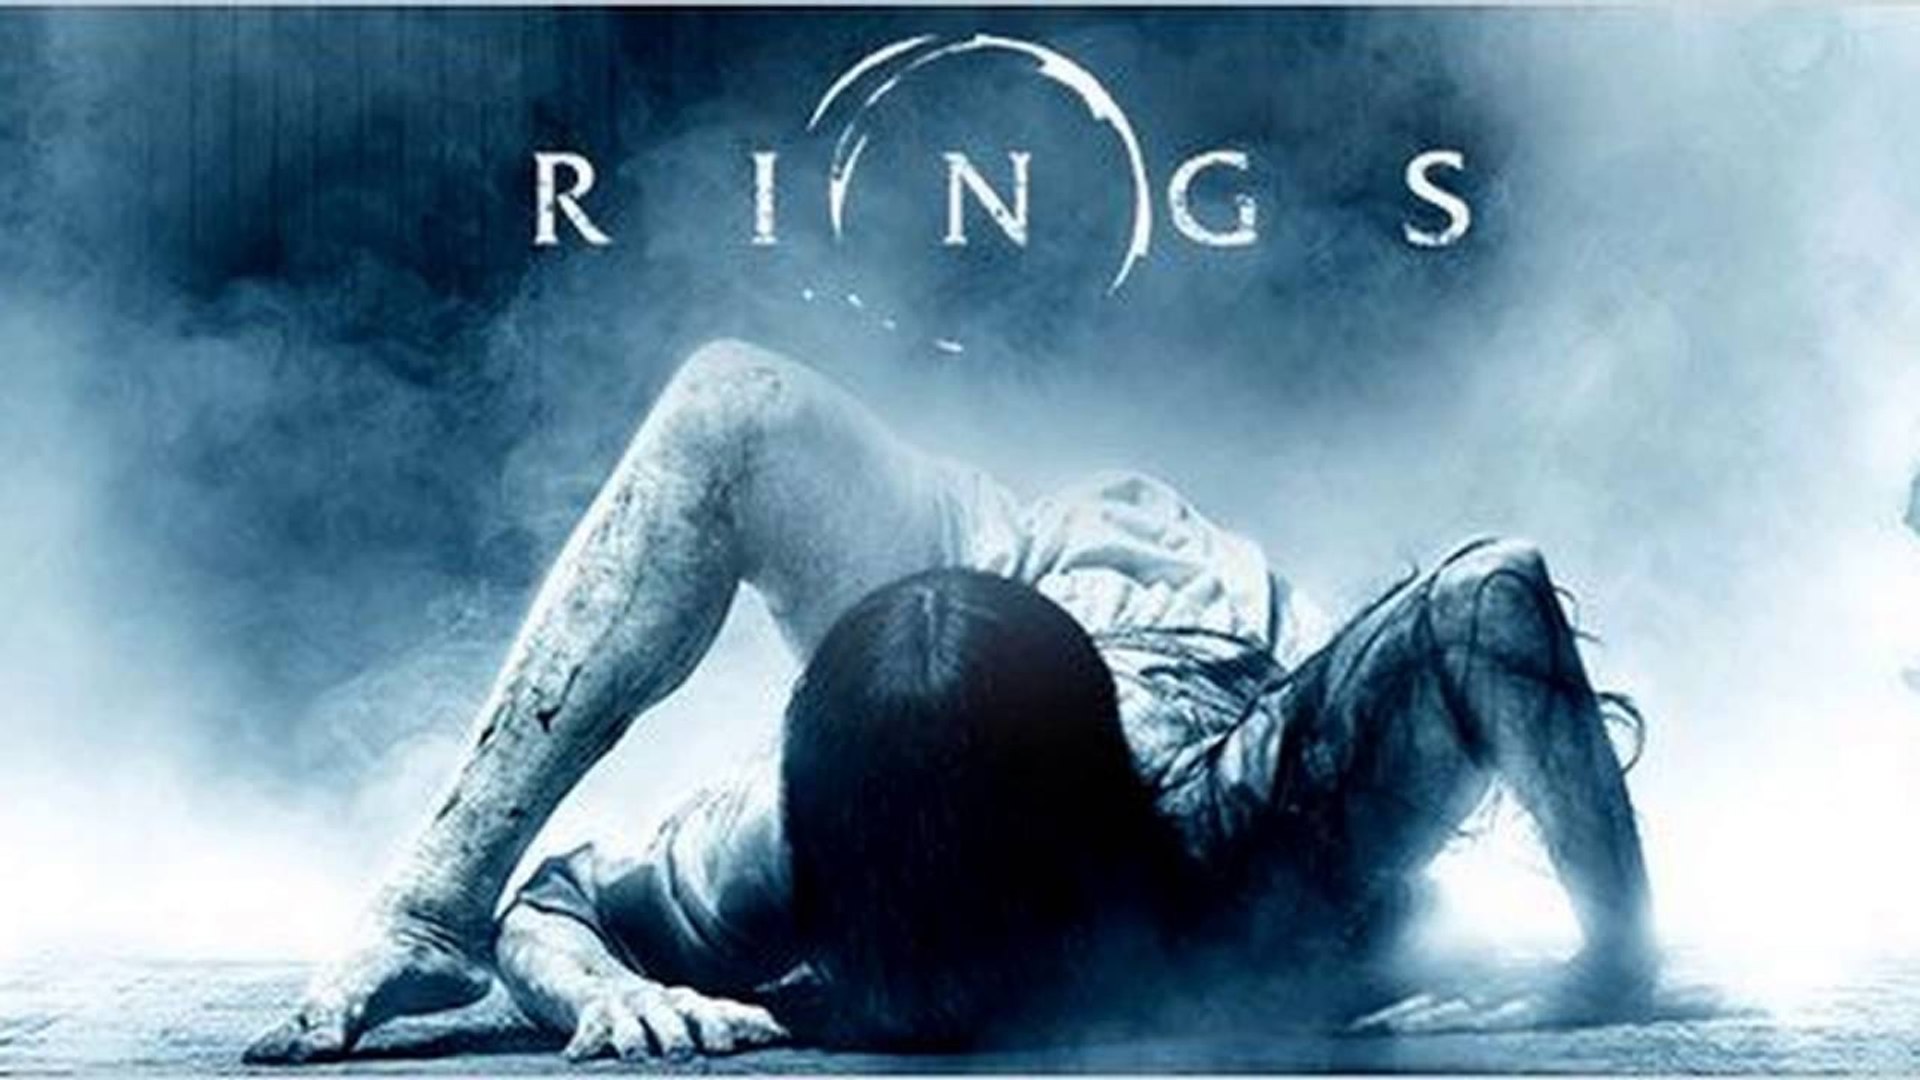 Rings (2017) Horror Movie Clips - video Dailymotion